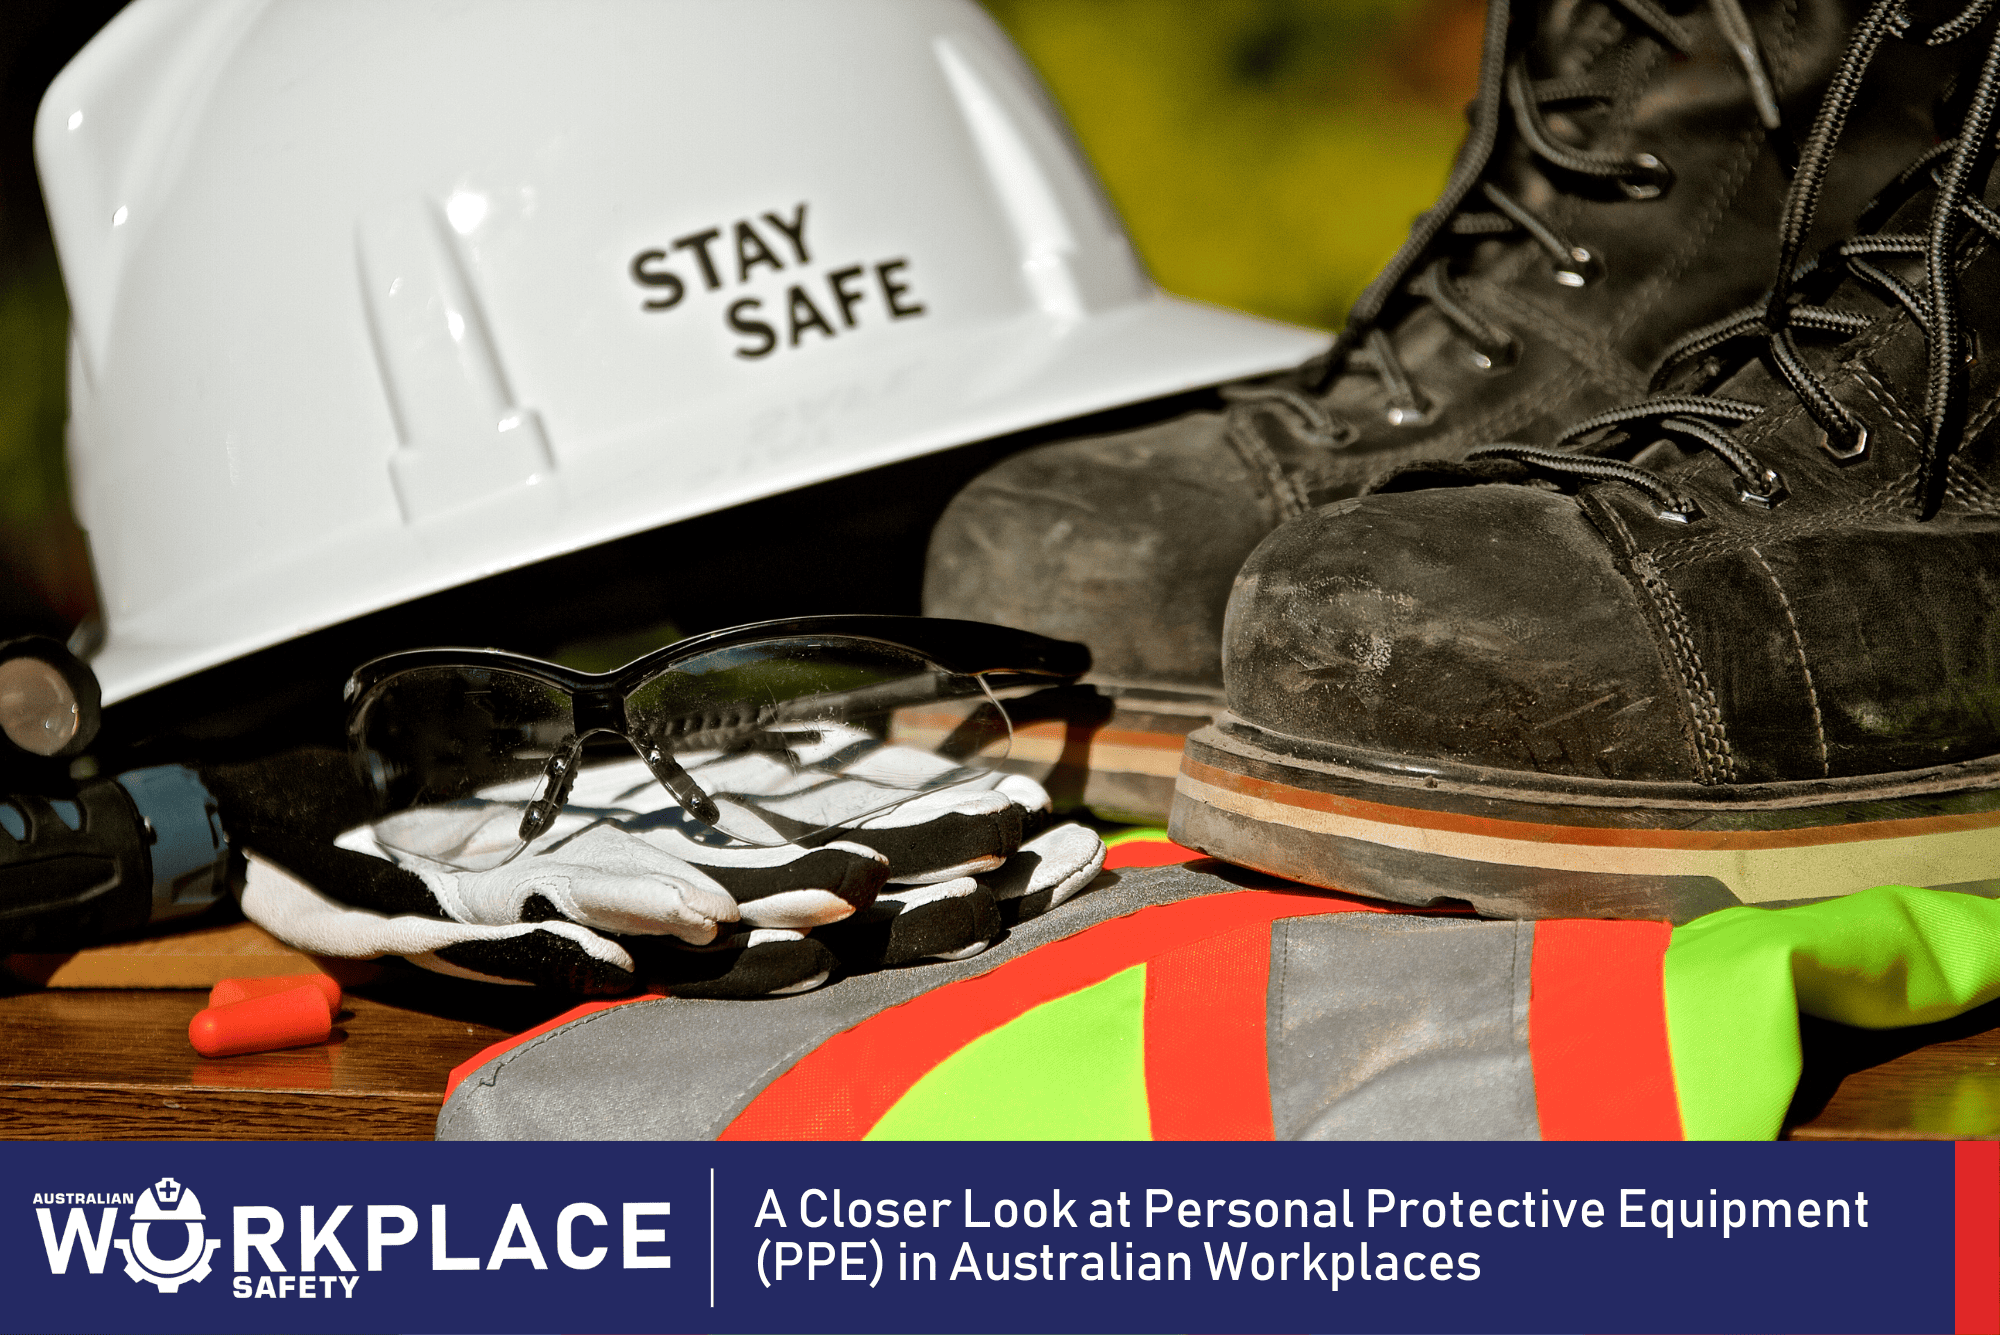 Home » Workplace Safety